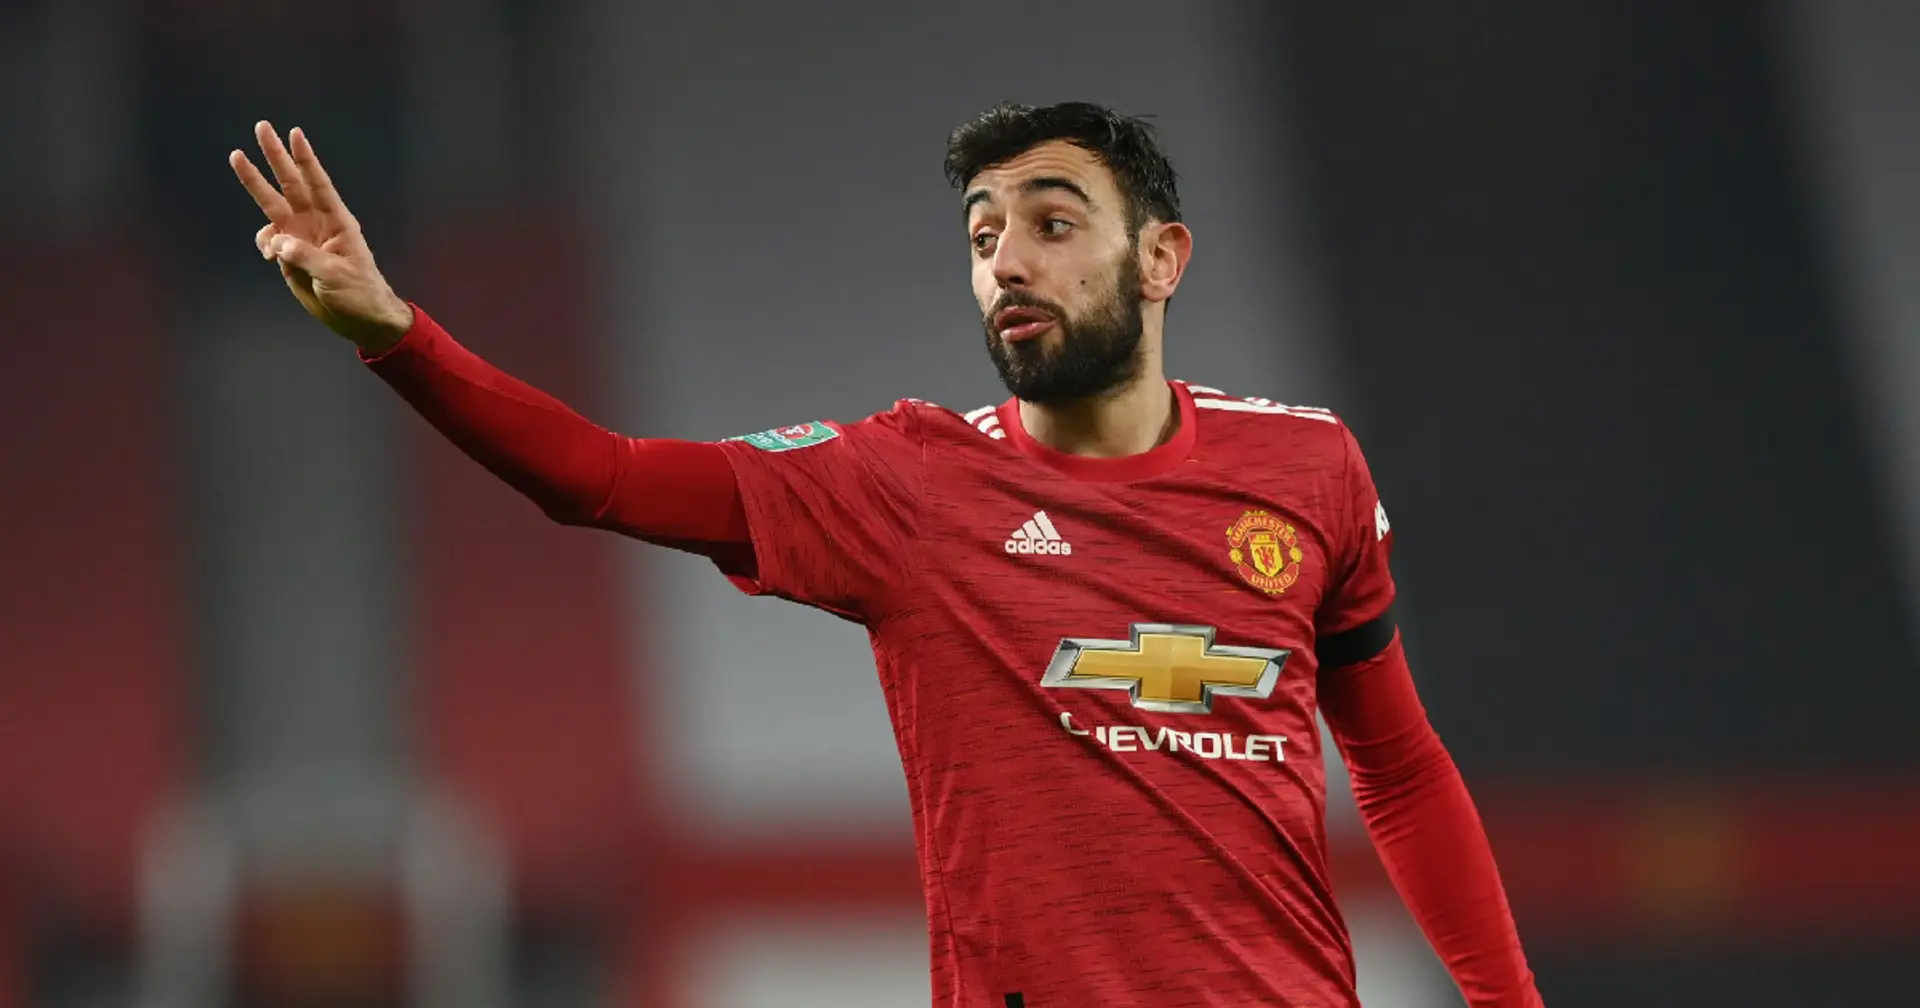 Bruno Fernandes ranks among most creative players across Europe's top 5 leagues